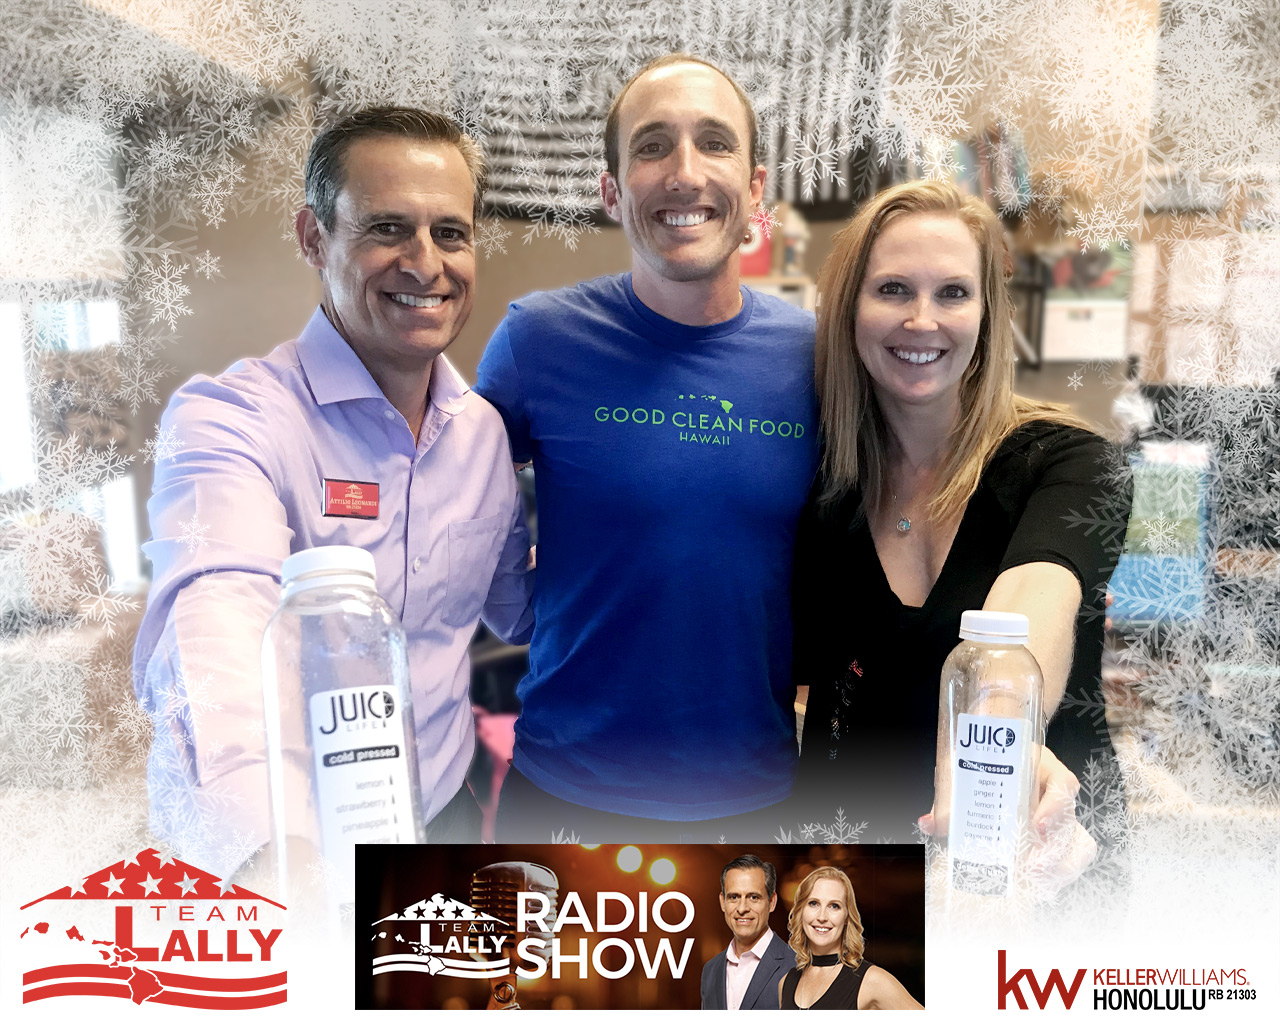 Bruce Ayres on the Team Lally Radio Show